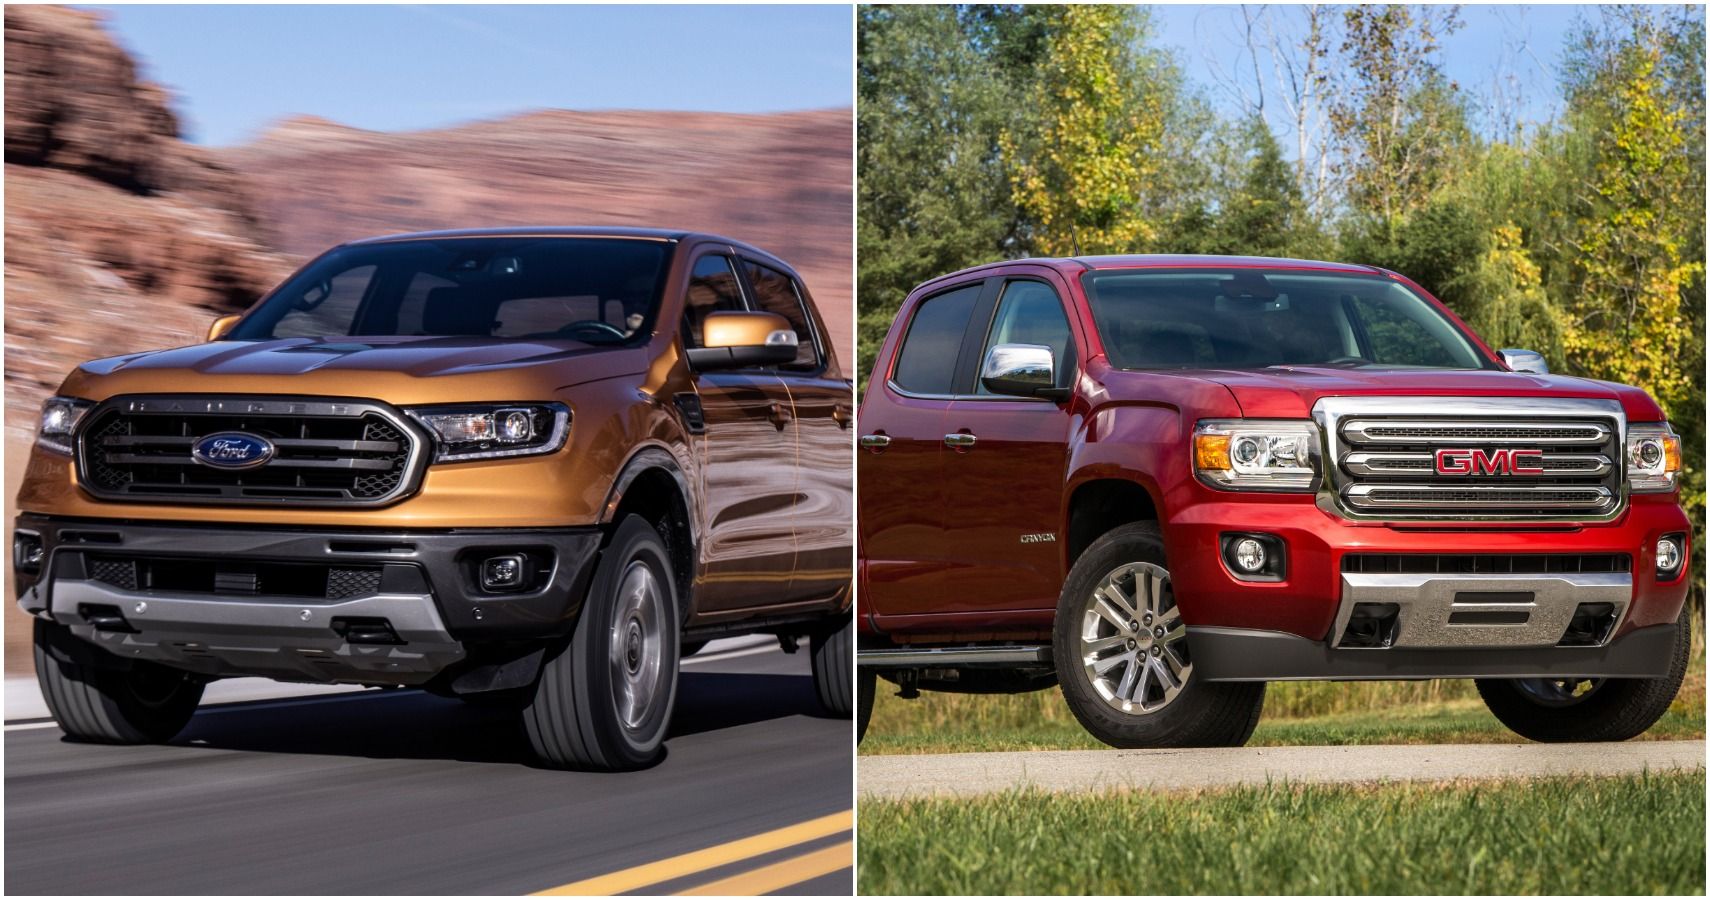 Ford Ranger Versus GMC Canyon Which Midsize Truck Is Better? [VIDEO]